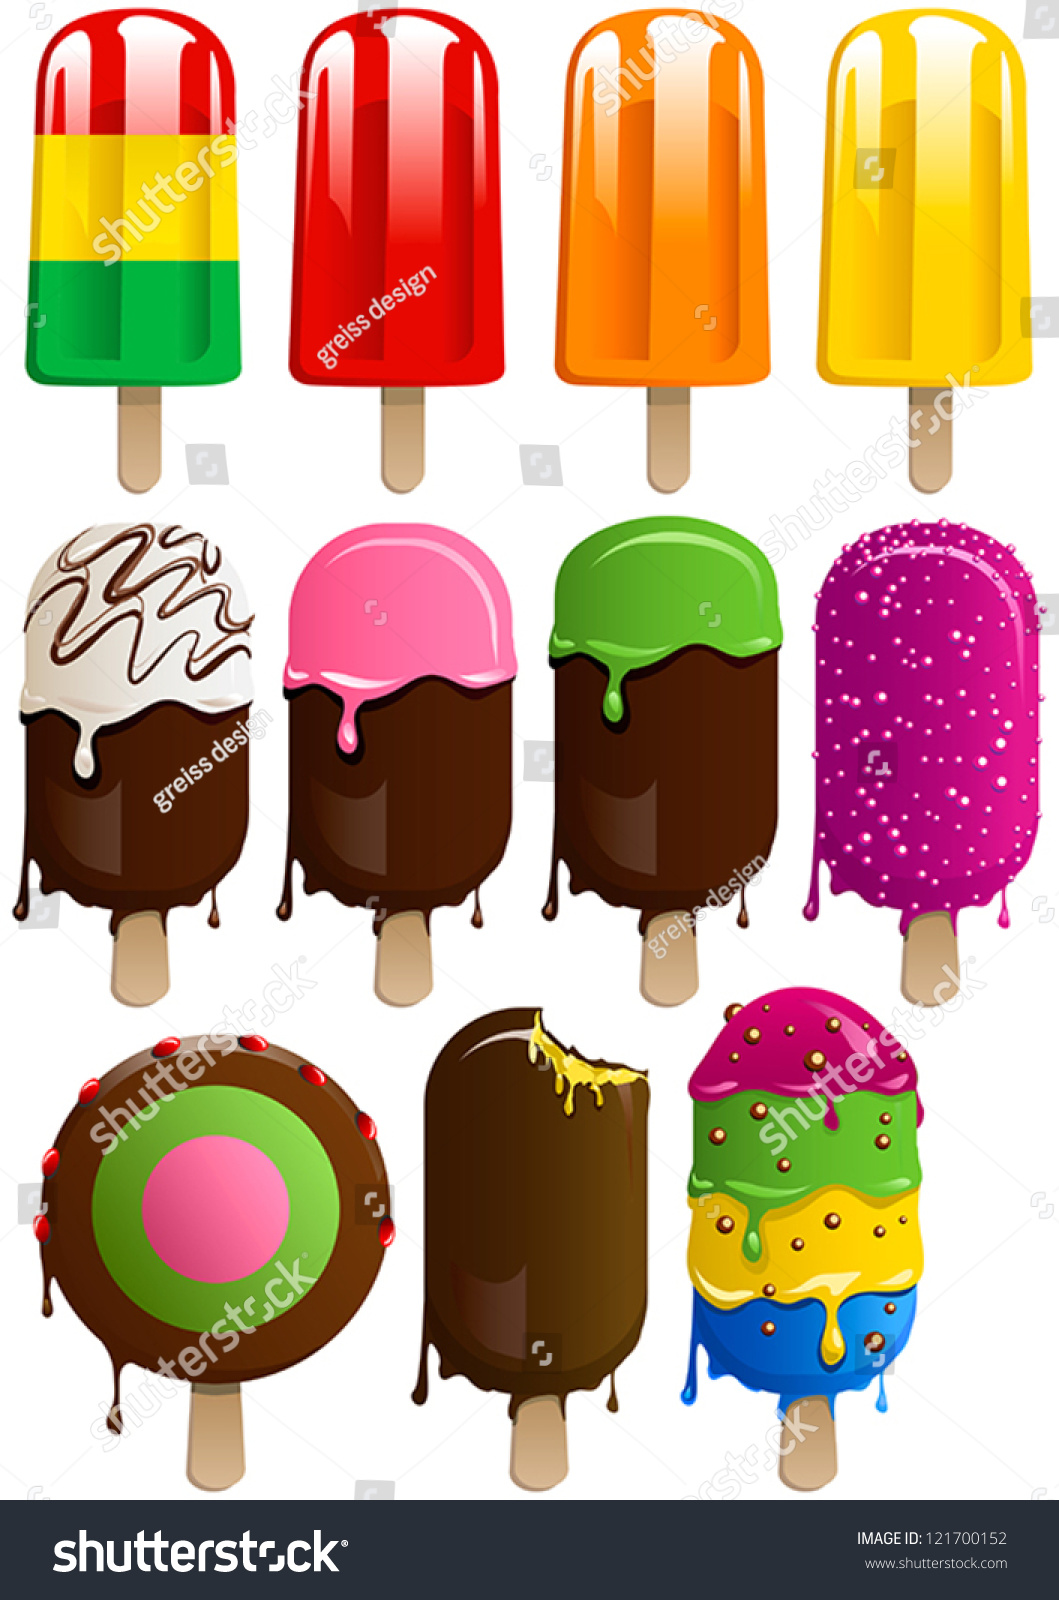 clipart ice lolly - photo #48